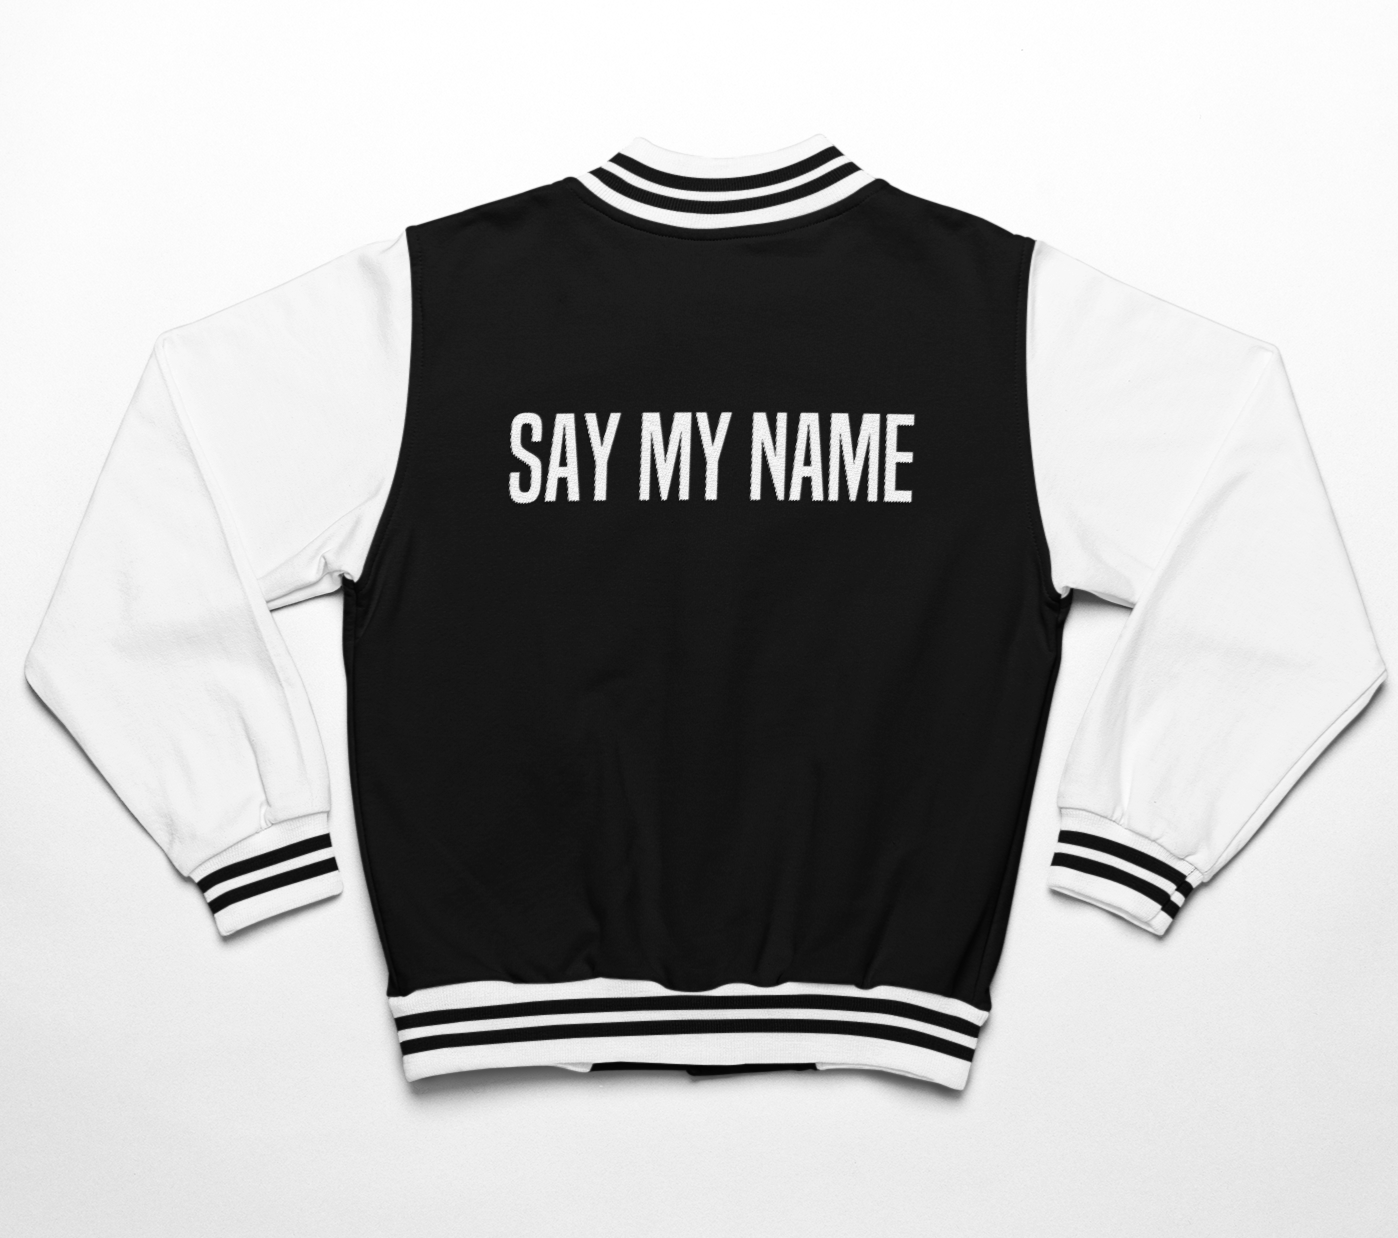 JACKET College CSG Man "SAY MY NAME"